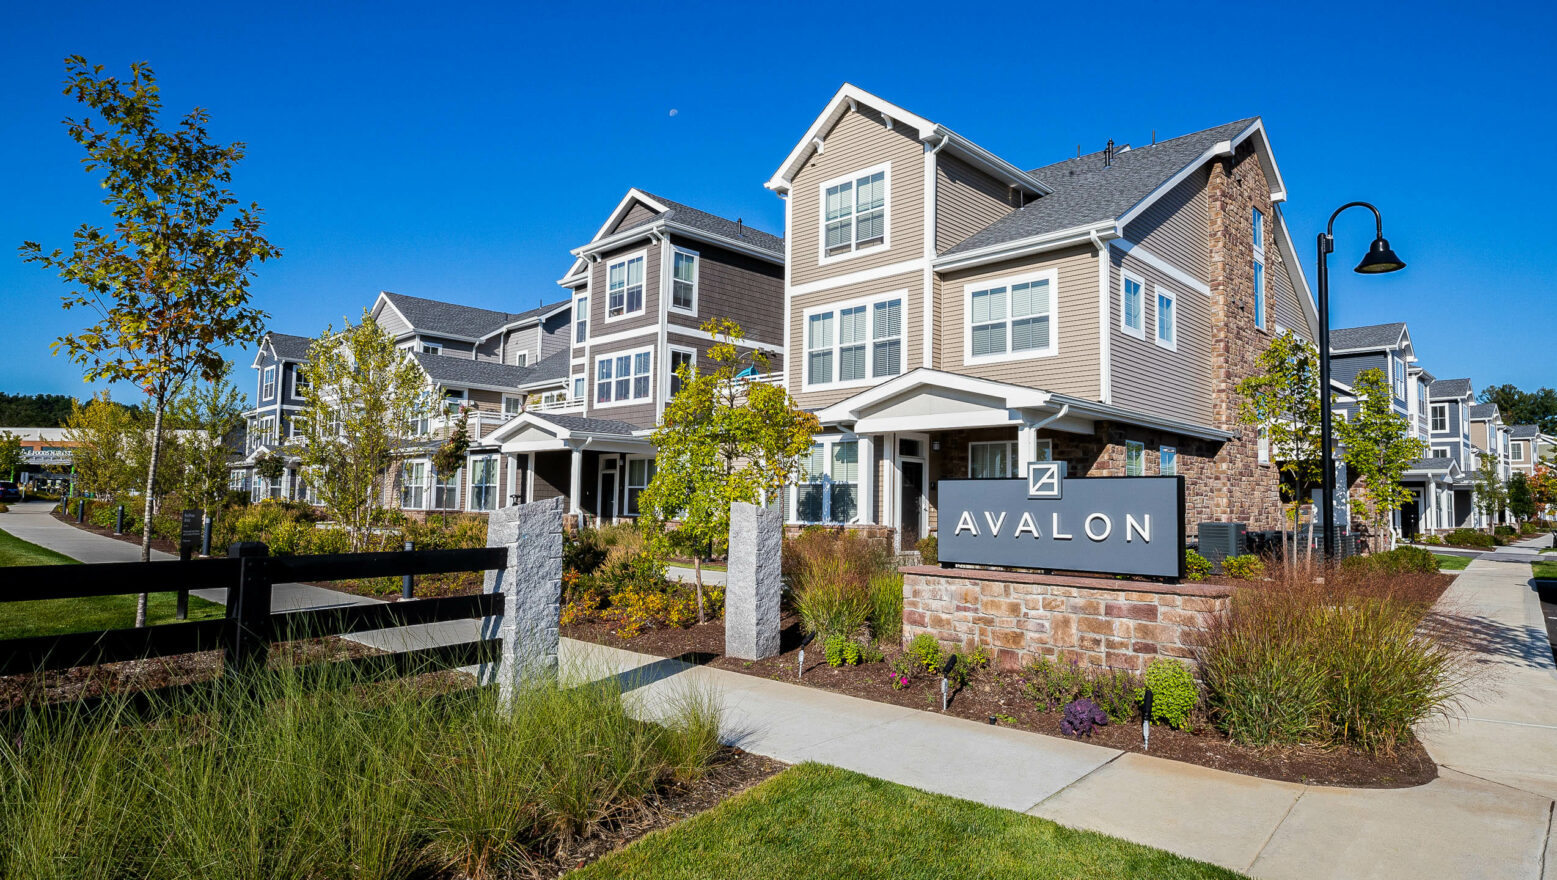 Avalon Apartments sign with landscaping. Dex by Terra Commercial Landscape Design-Build project.